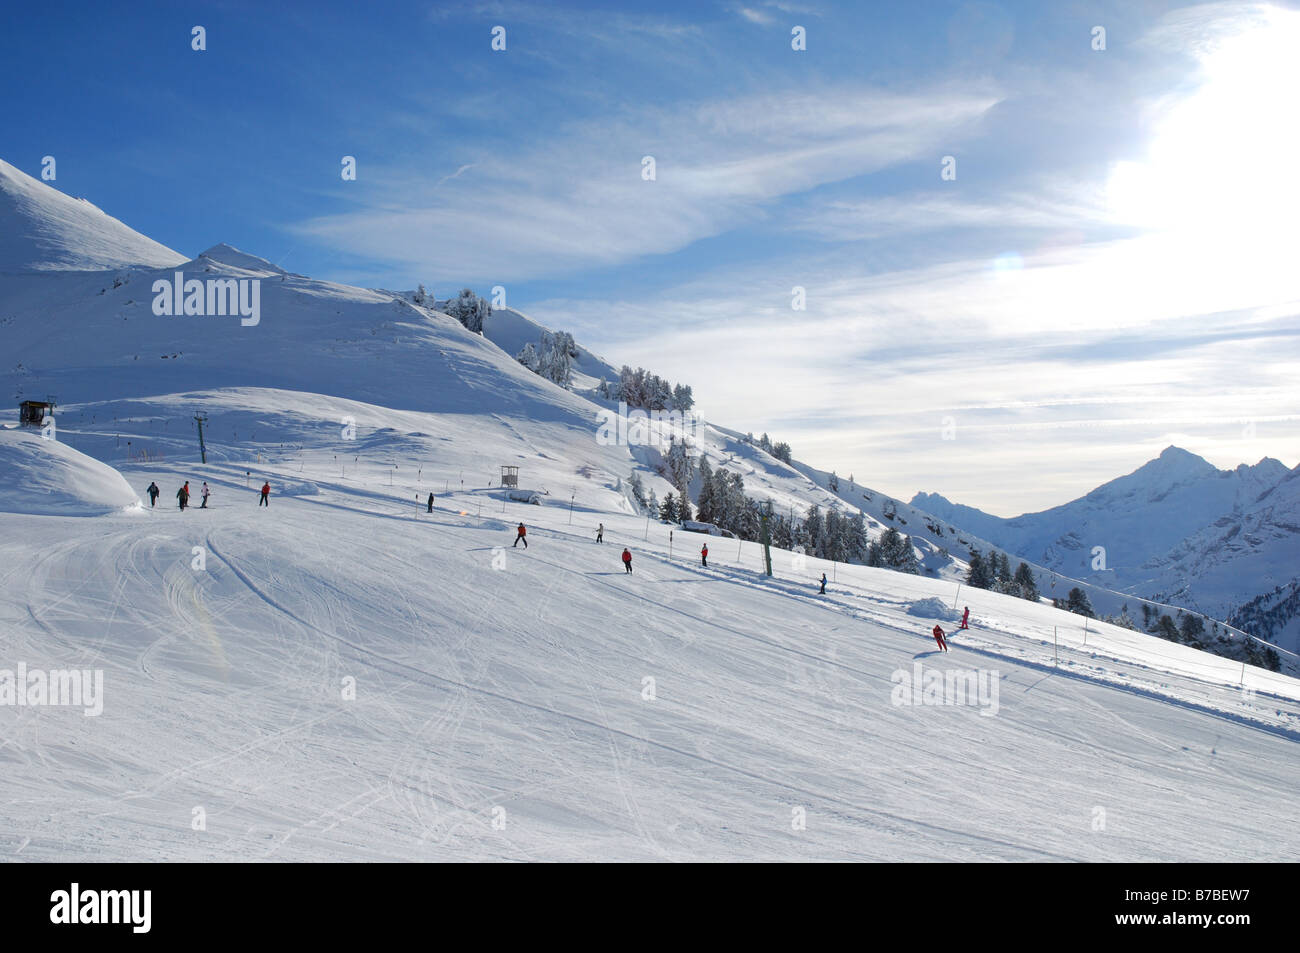 skiing in the Ahorn mountains Mayrhofen Austria Stock Photo